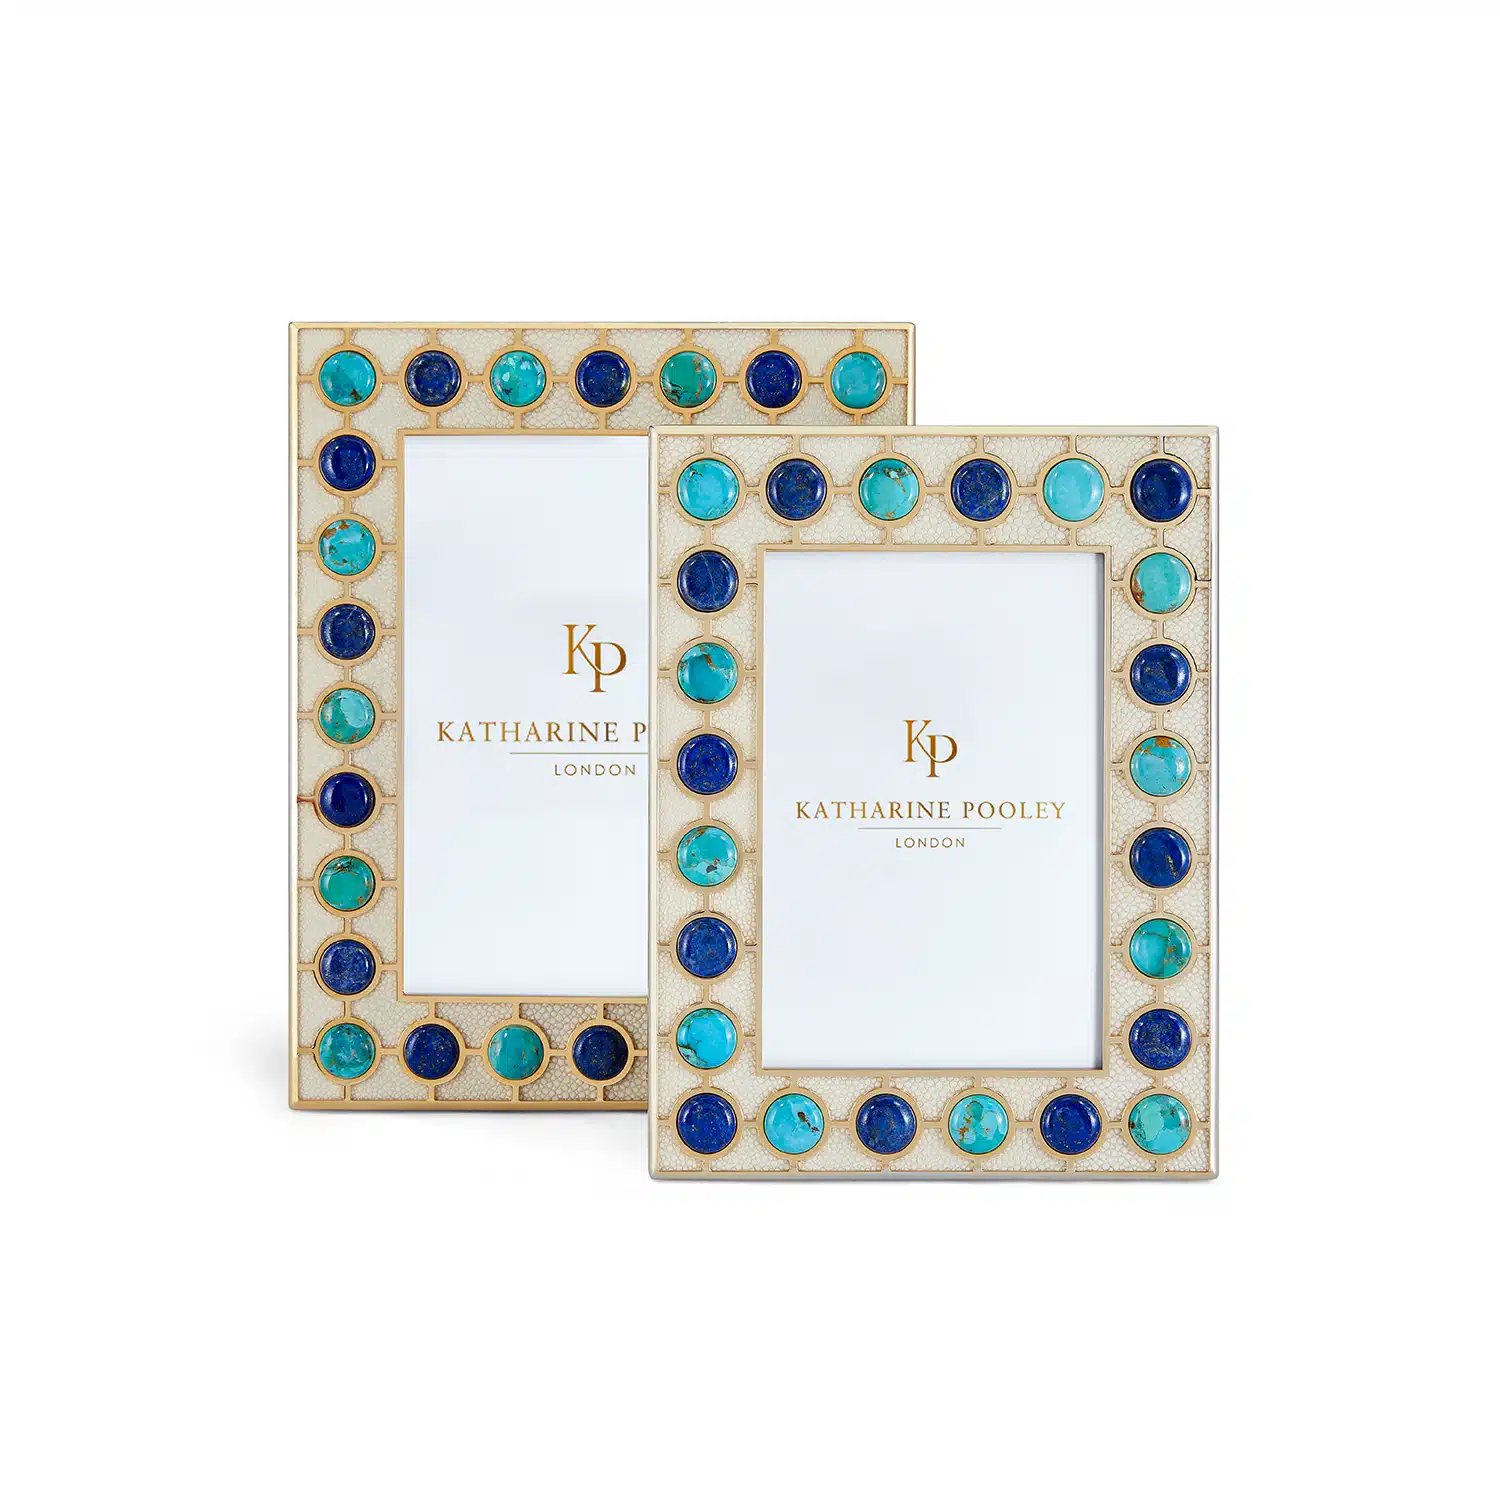 A gorgeous luxury photograph frame of turquoise and lapis lazui